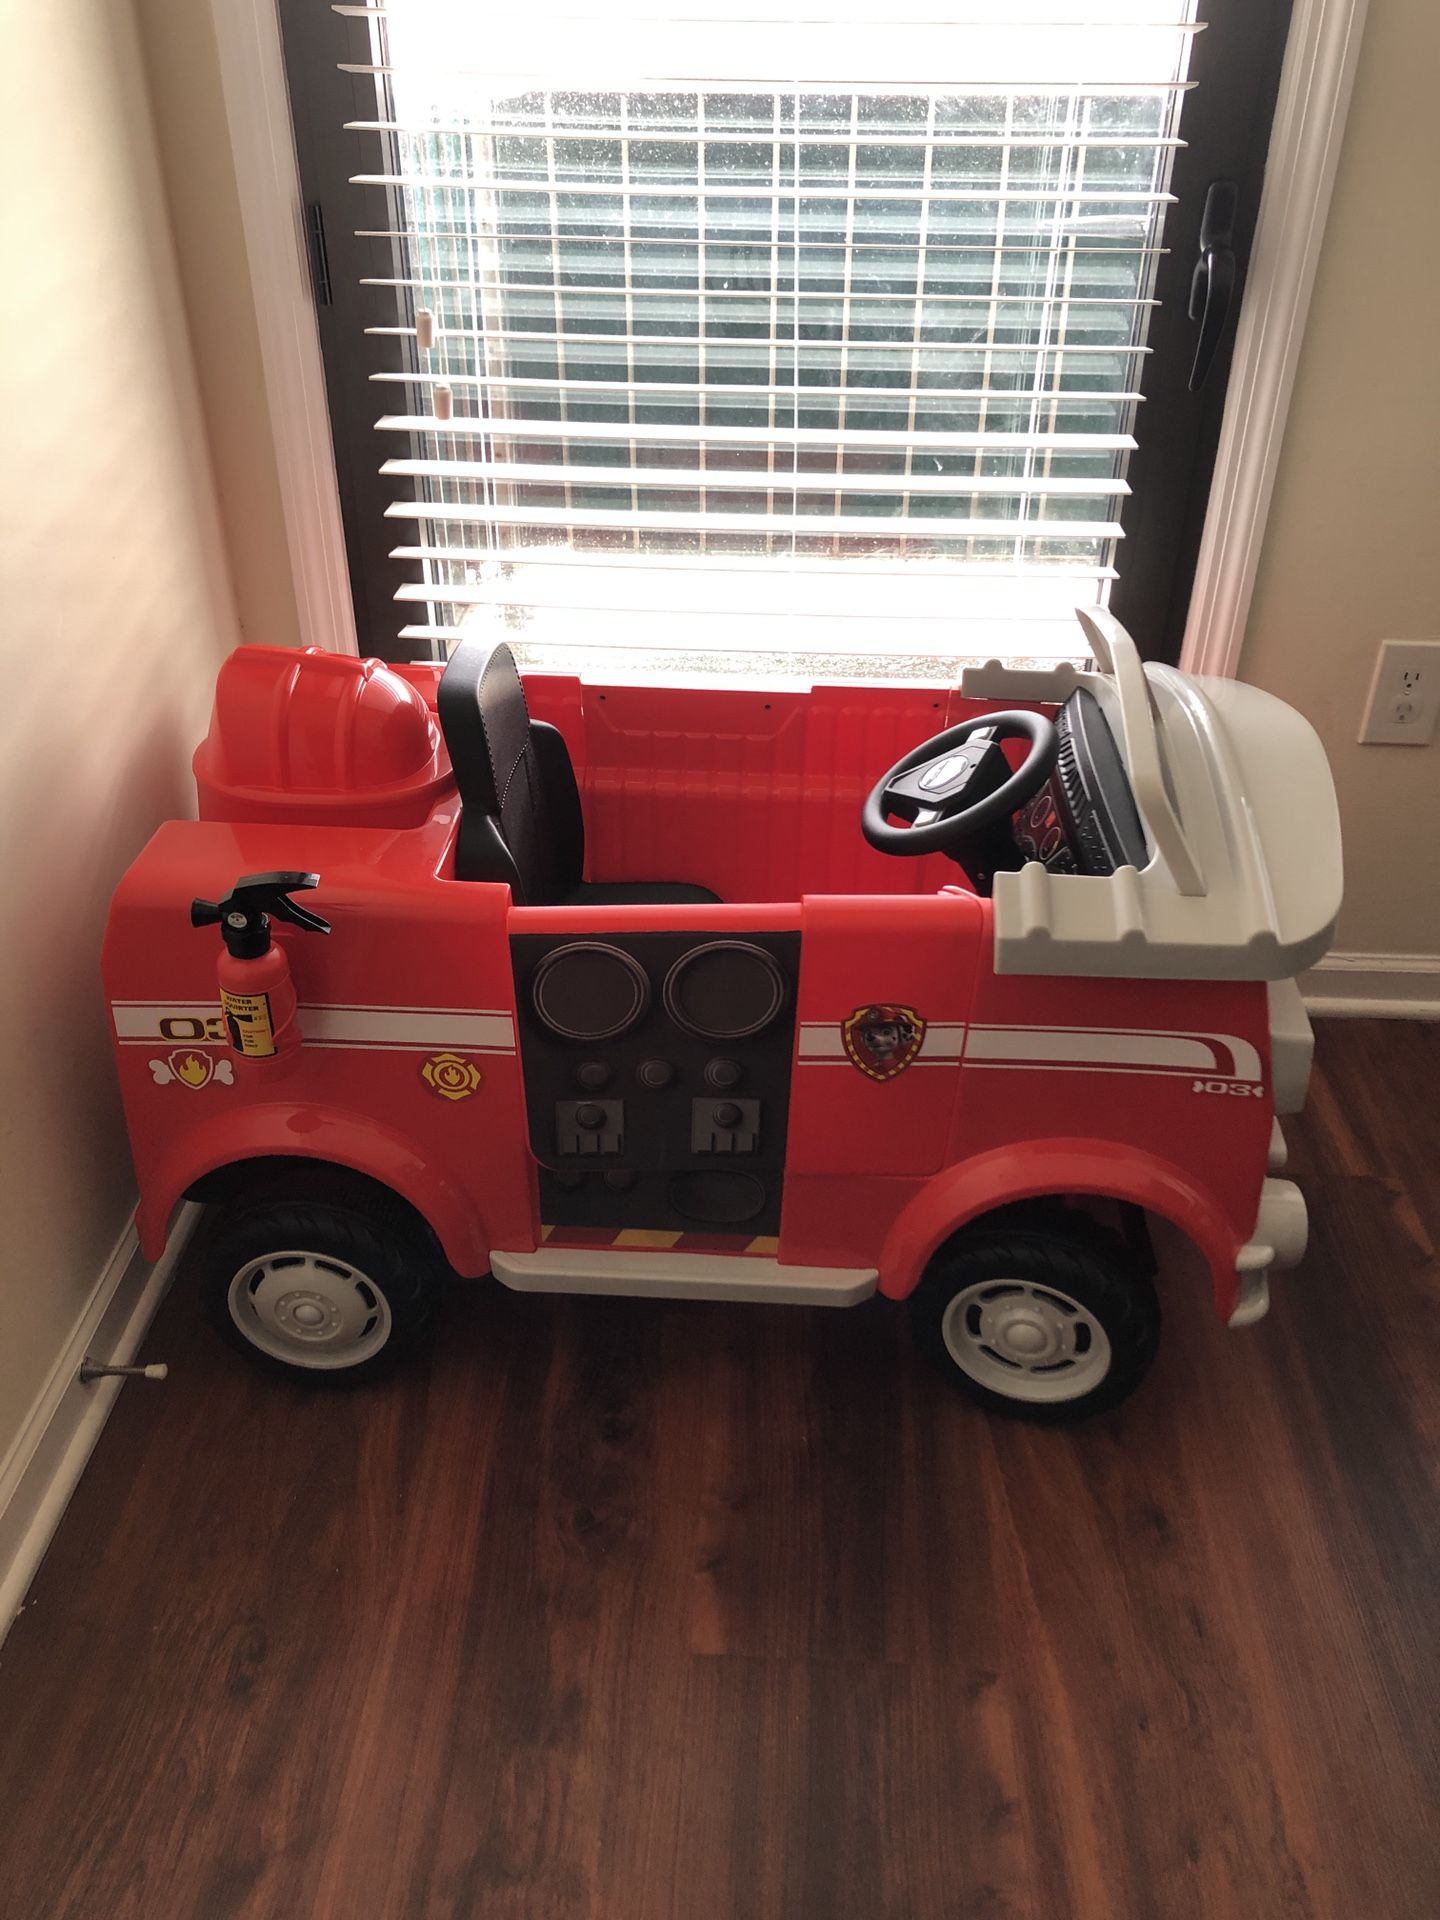 Paw Patrol Fire truck 6 Volt Powered Ride on toy